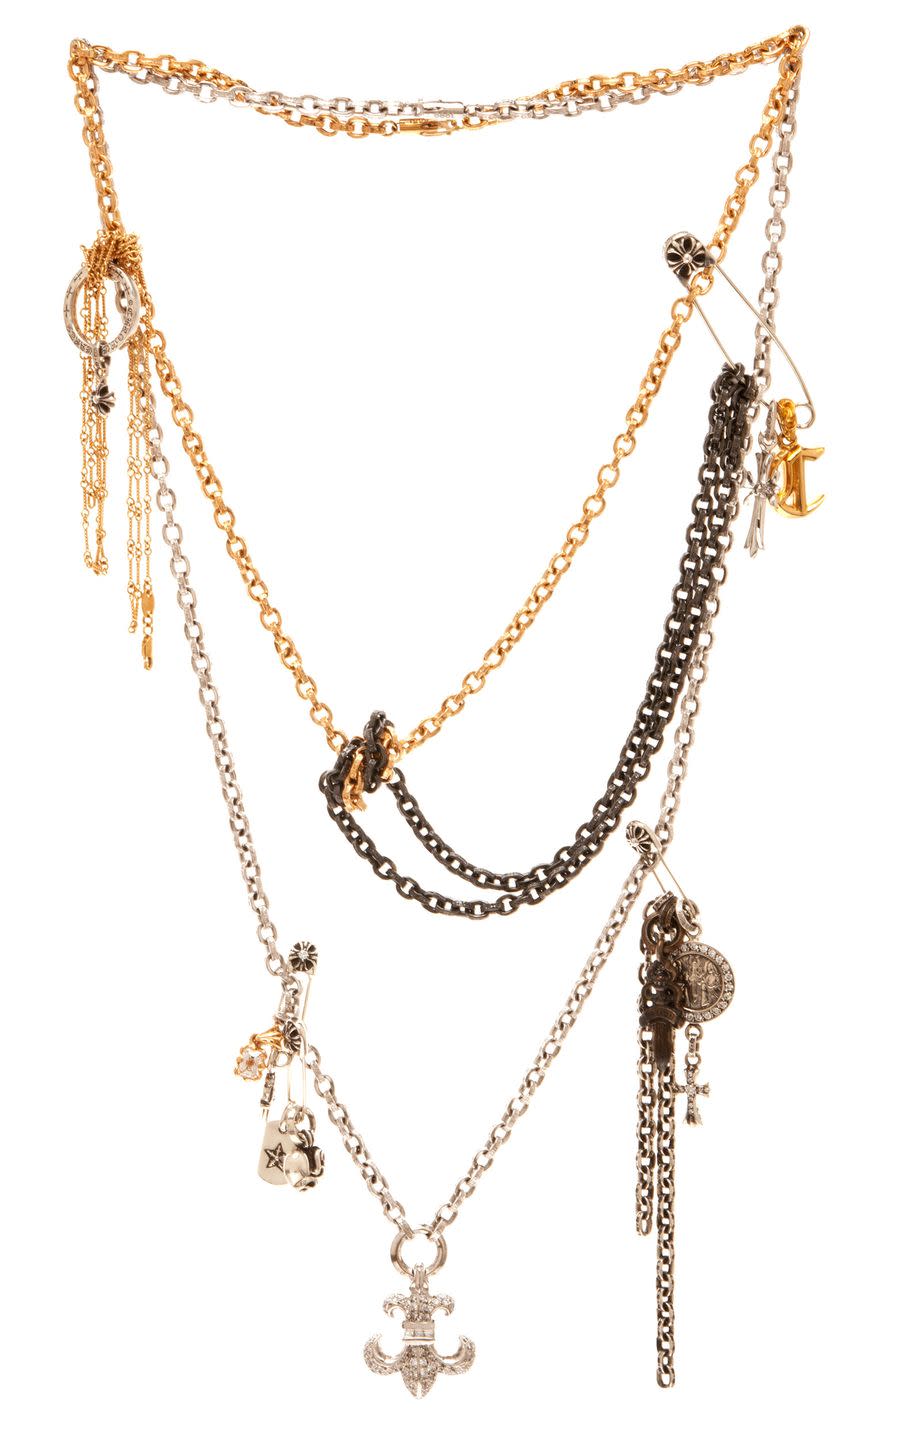 necklaces with various charms and gold safety pin like charms